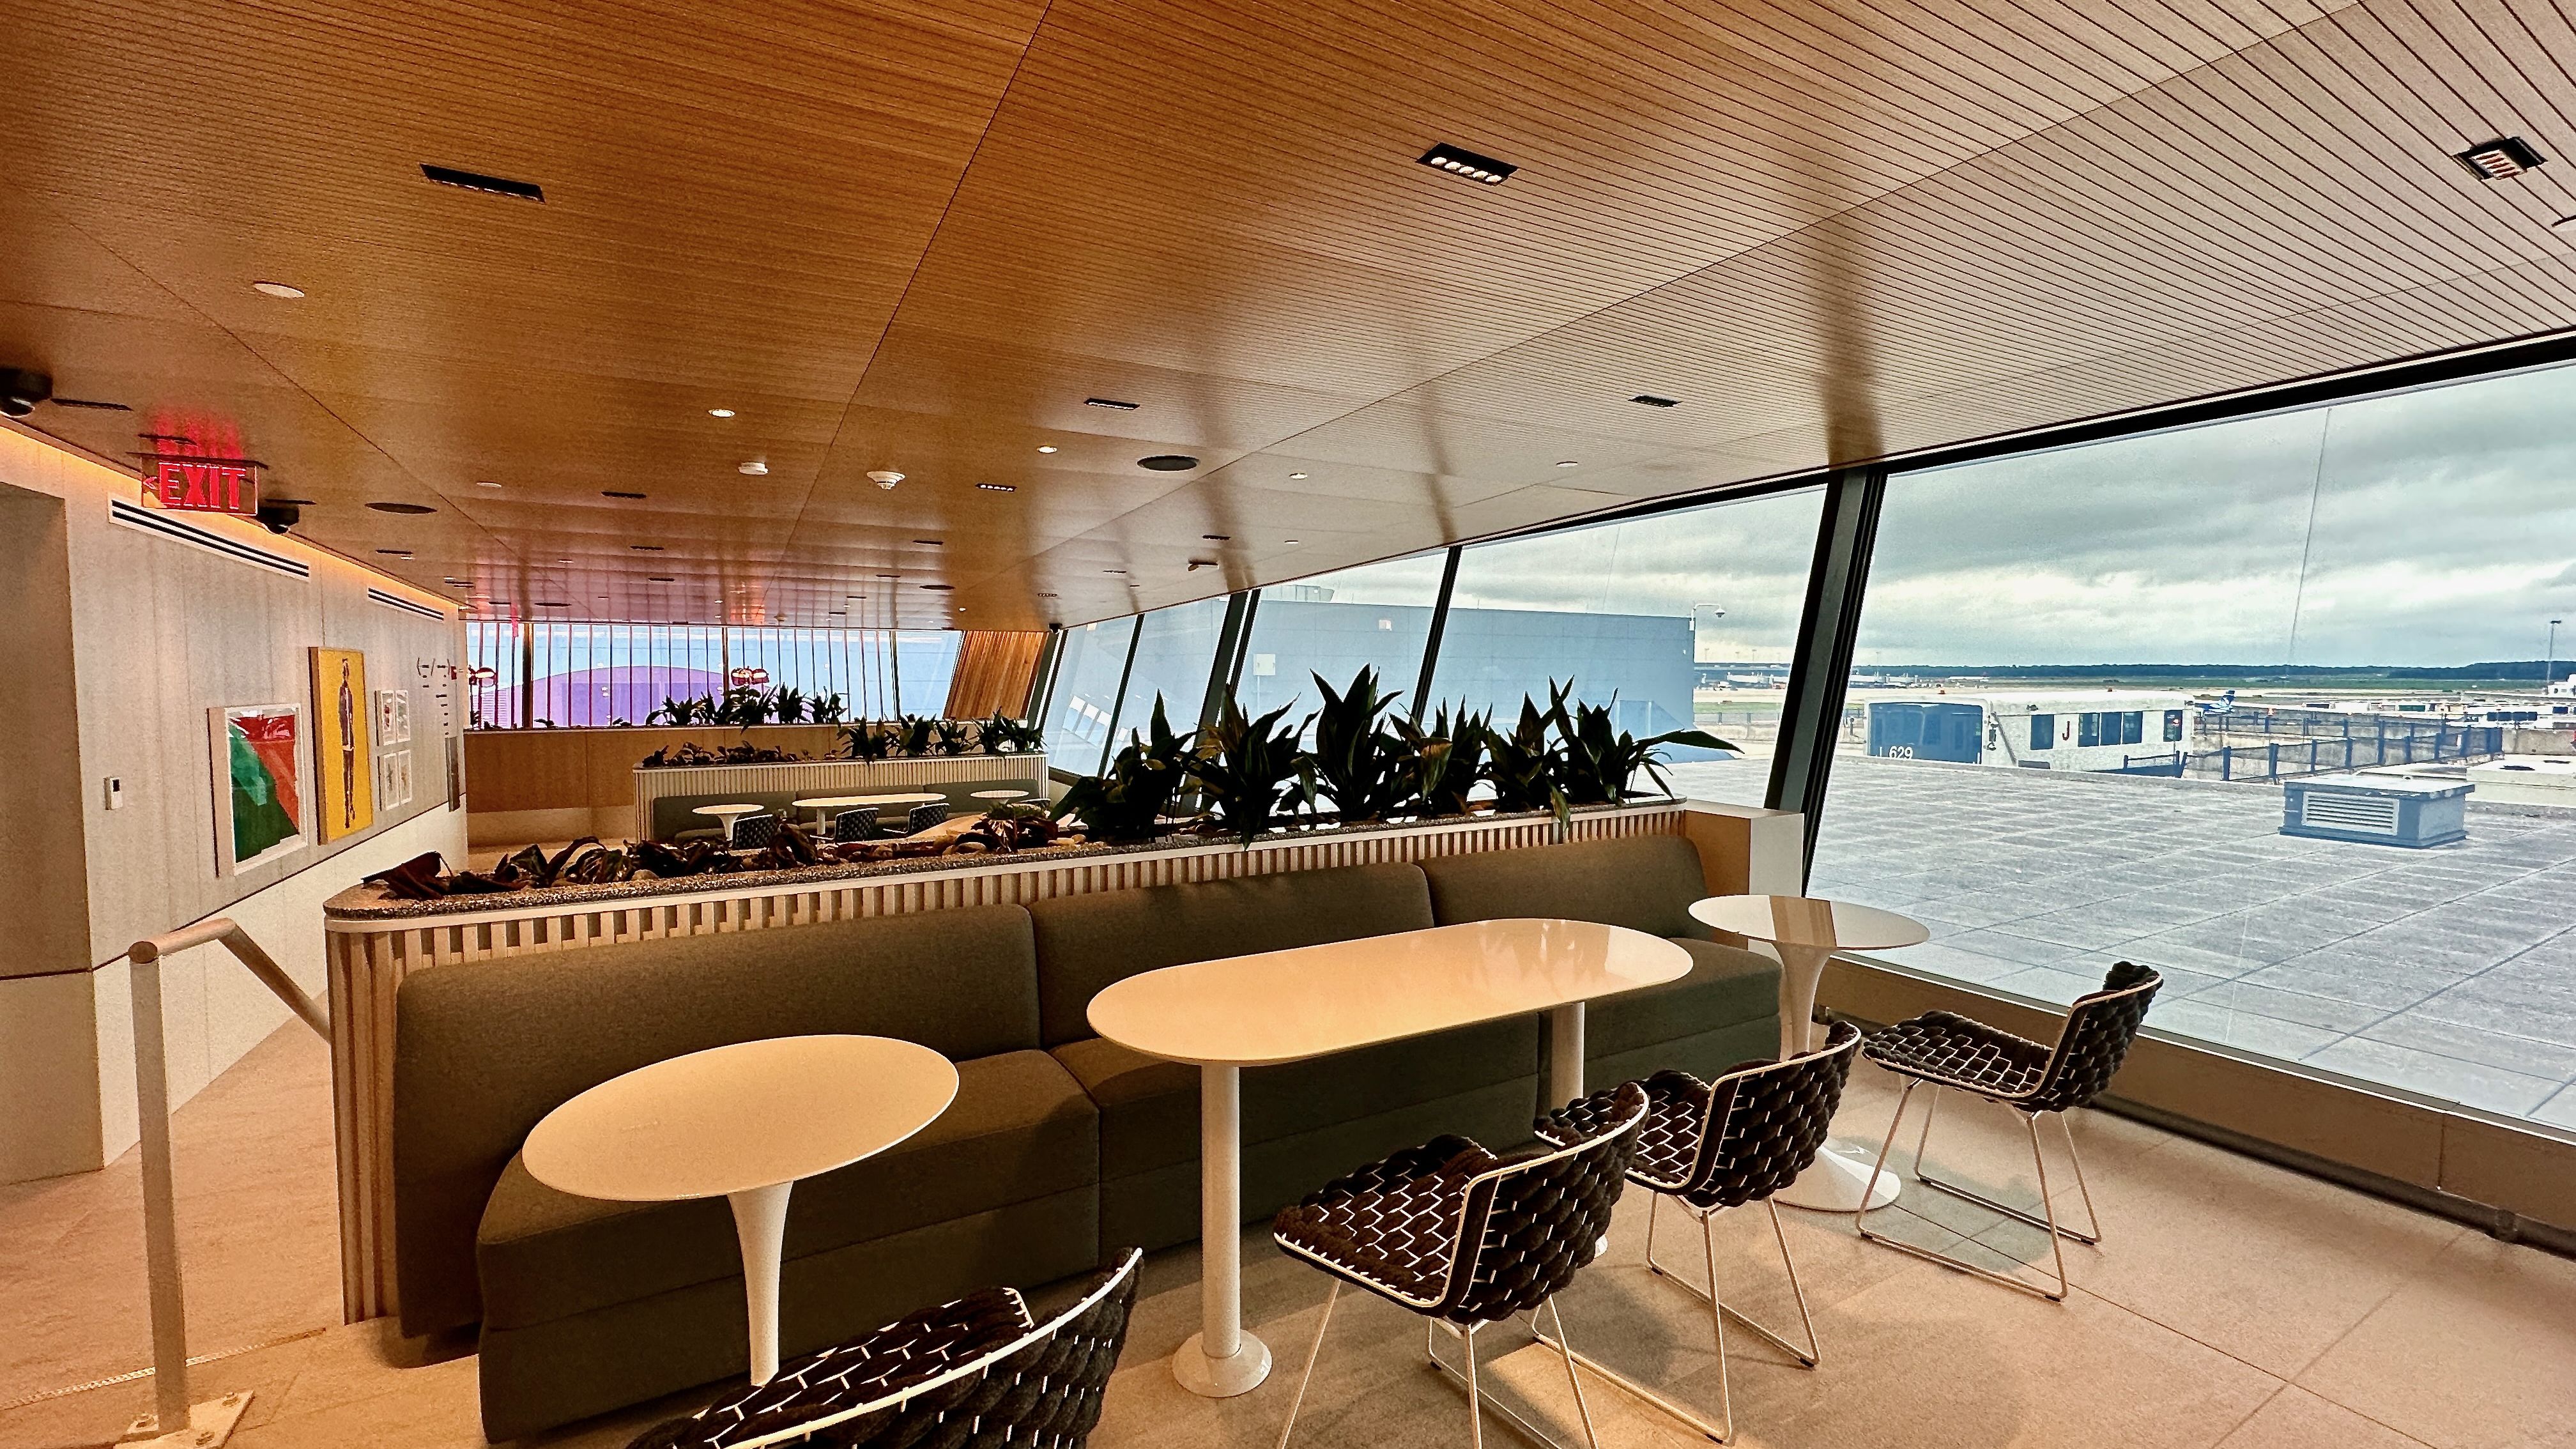 First look at Capital One airport lounge opening in Washing Dulles  international airport